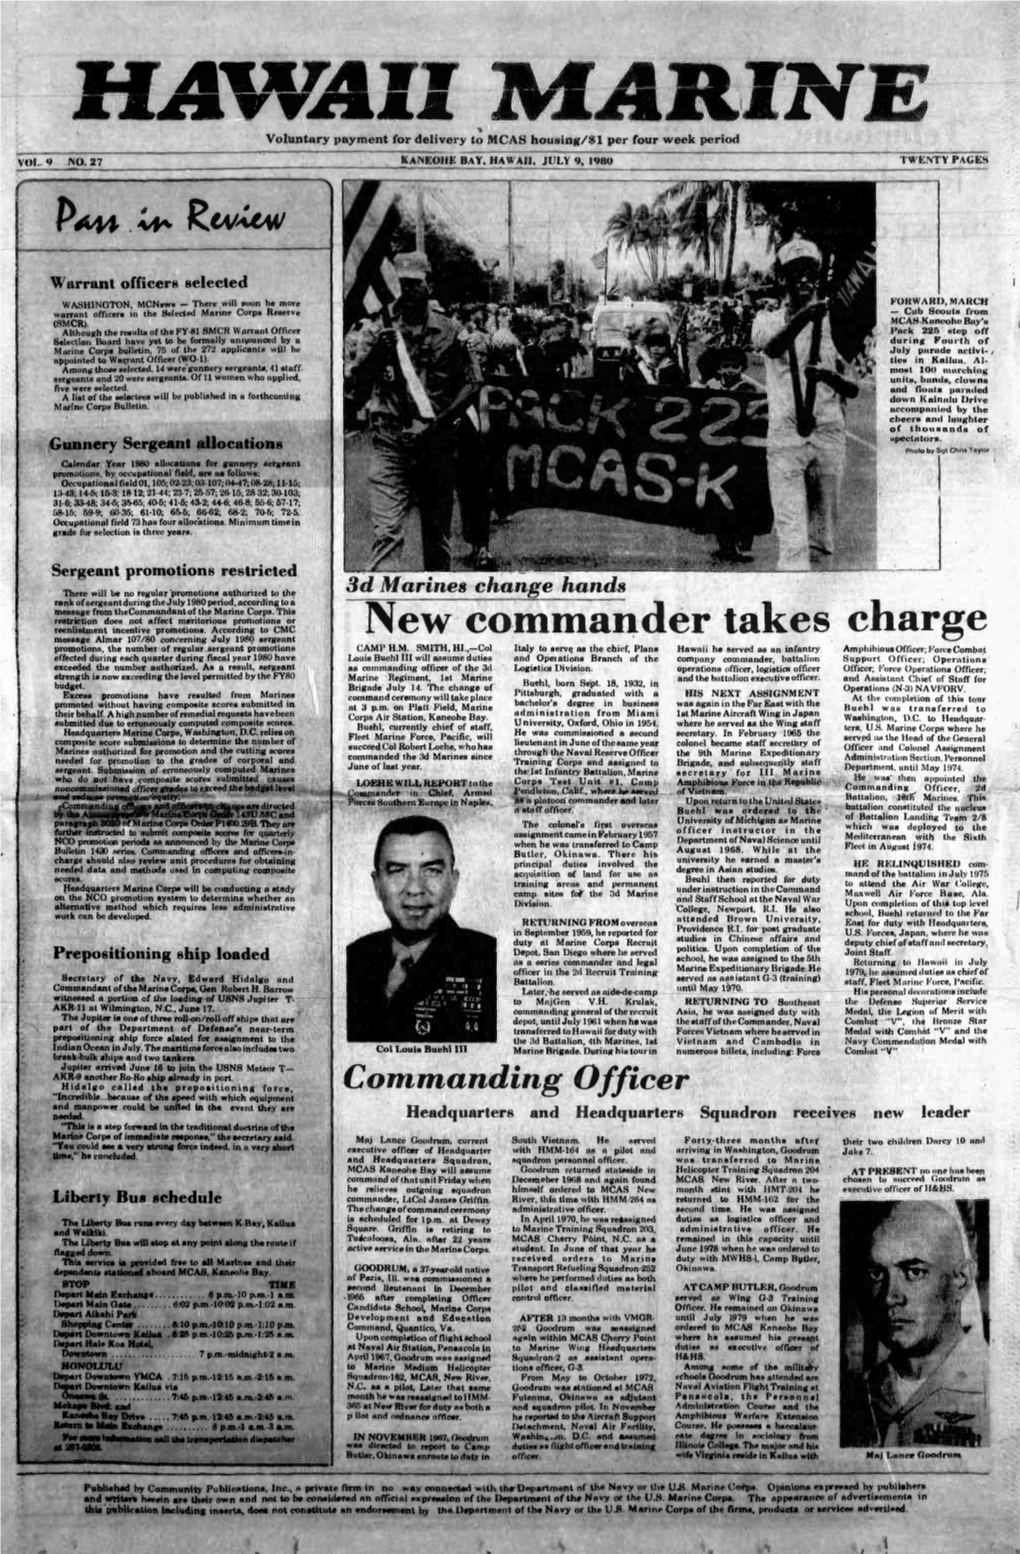 New Commander Takes Charge Message Almar 107/80 Concerning July 1980 Sergeant Promotions, the Number of Regular Sergeant Promotions CAMP H.M